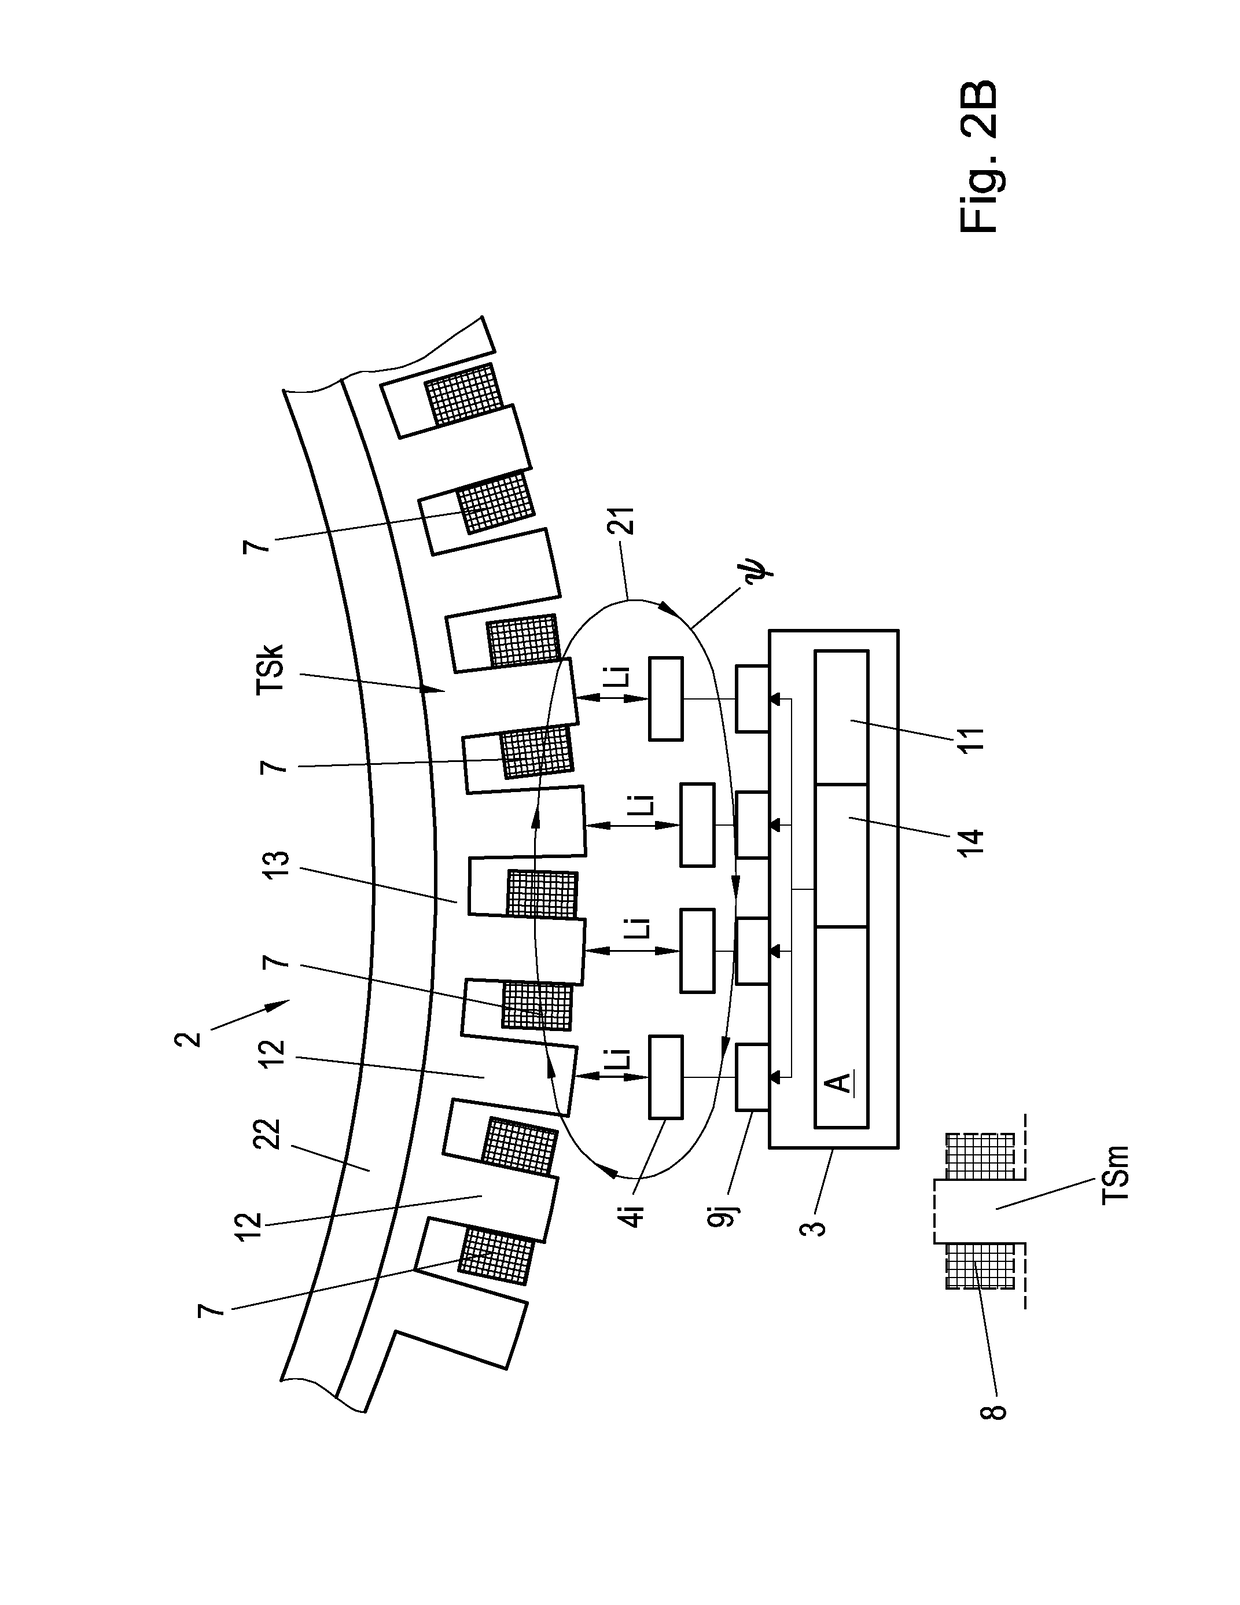 Method for operating a transport apparatus in the form of a long stator linear motor